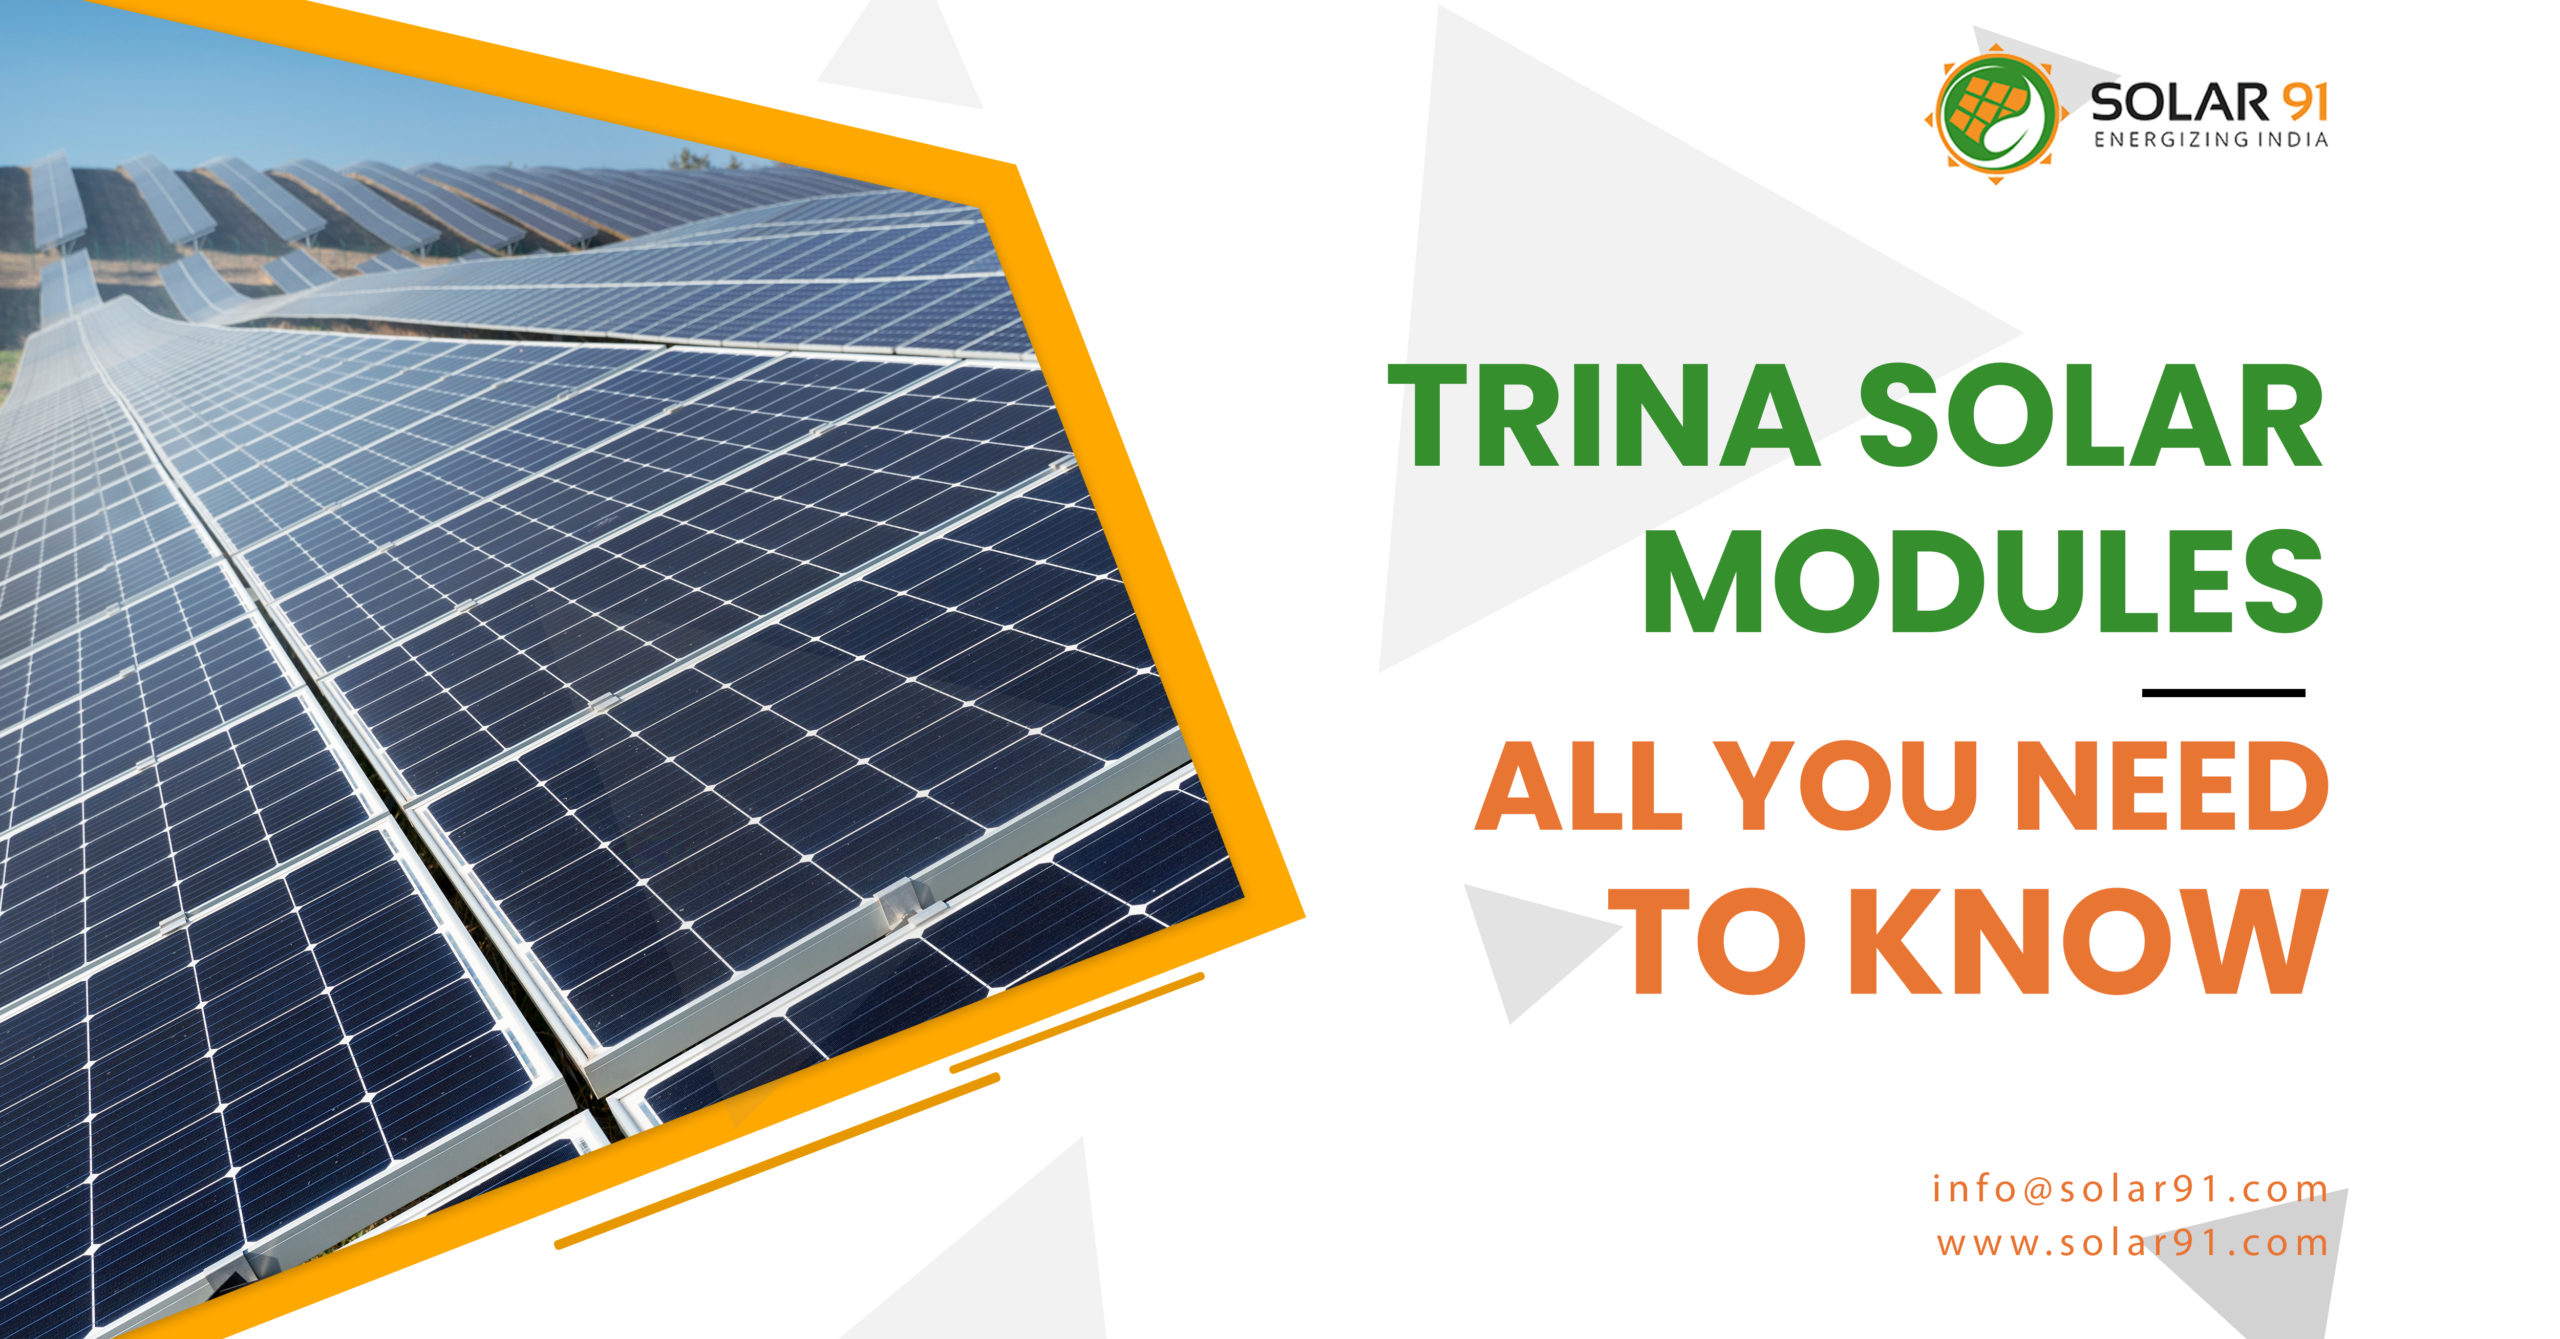 Trina Solar Modules – All You Need To Know